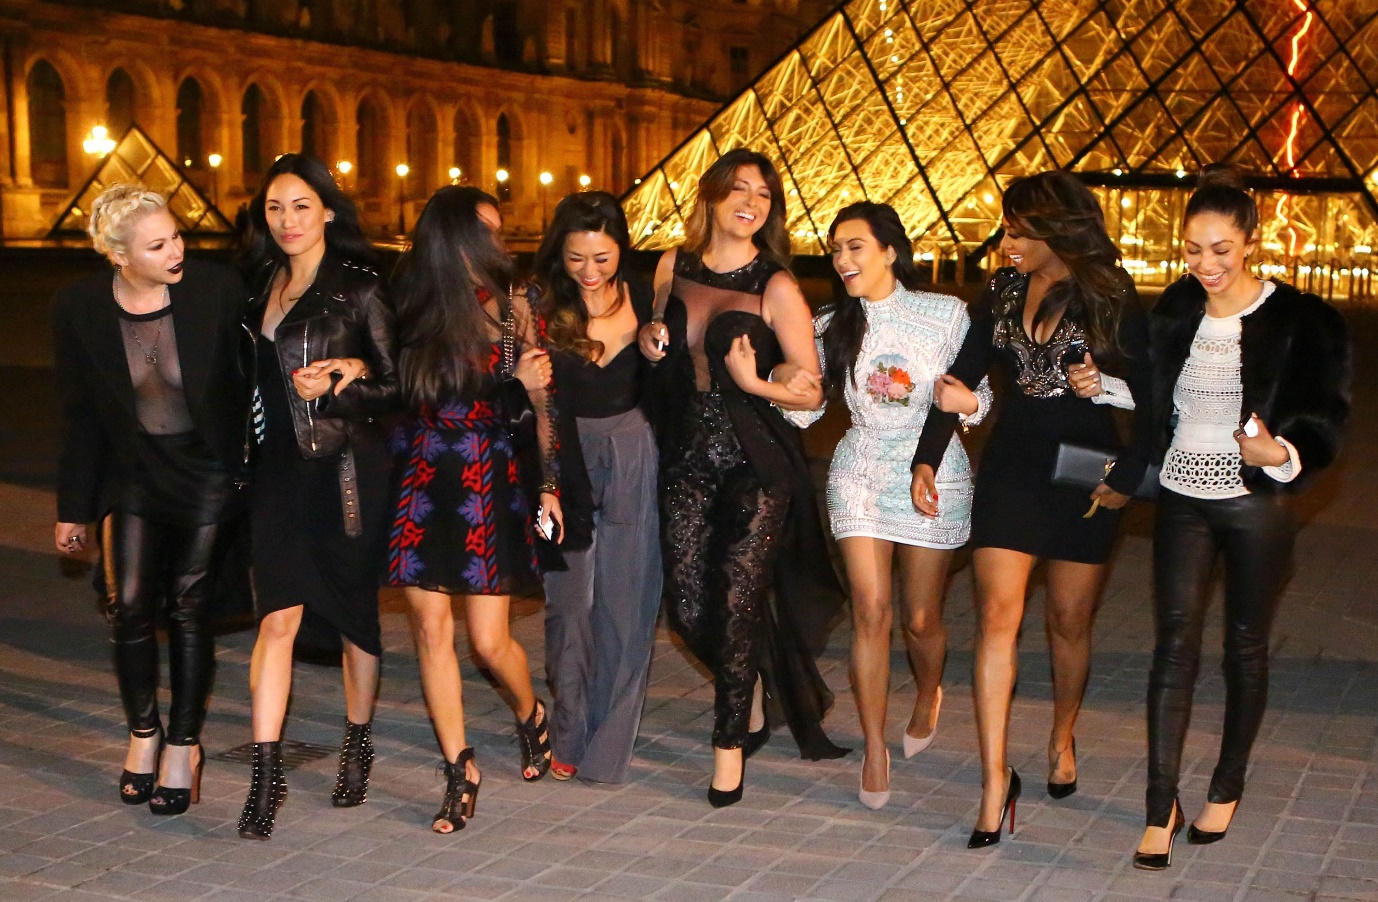 Kim Kardashian for her bachelorette party at the Louvre Museum in Paris, France | Wedifys